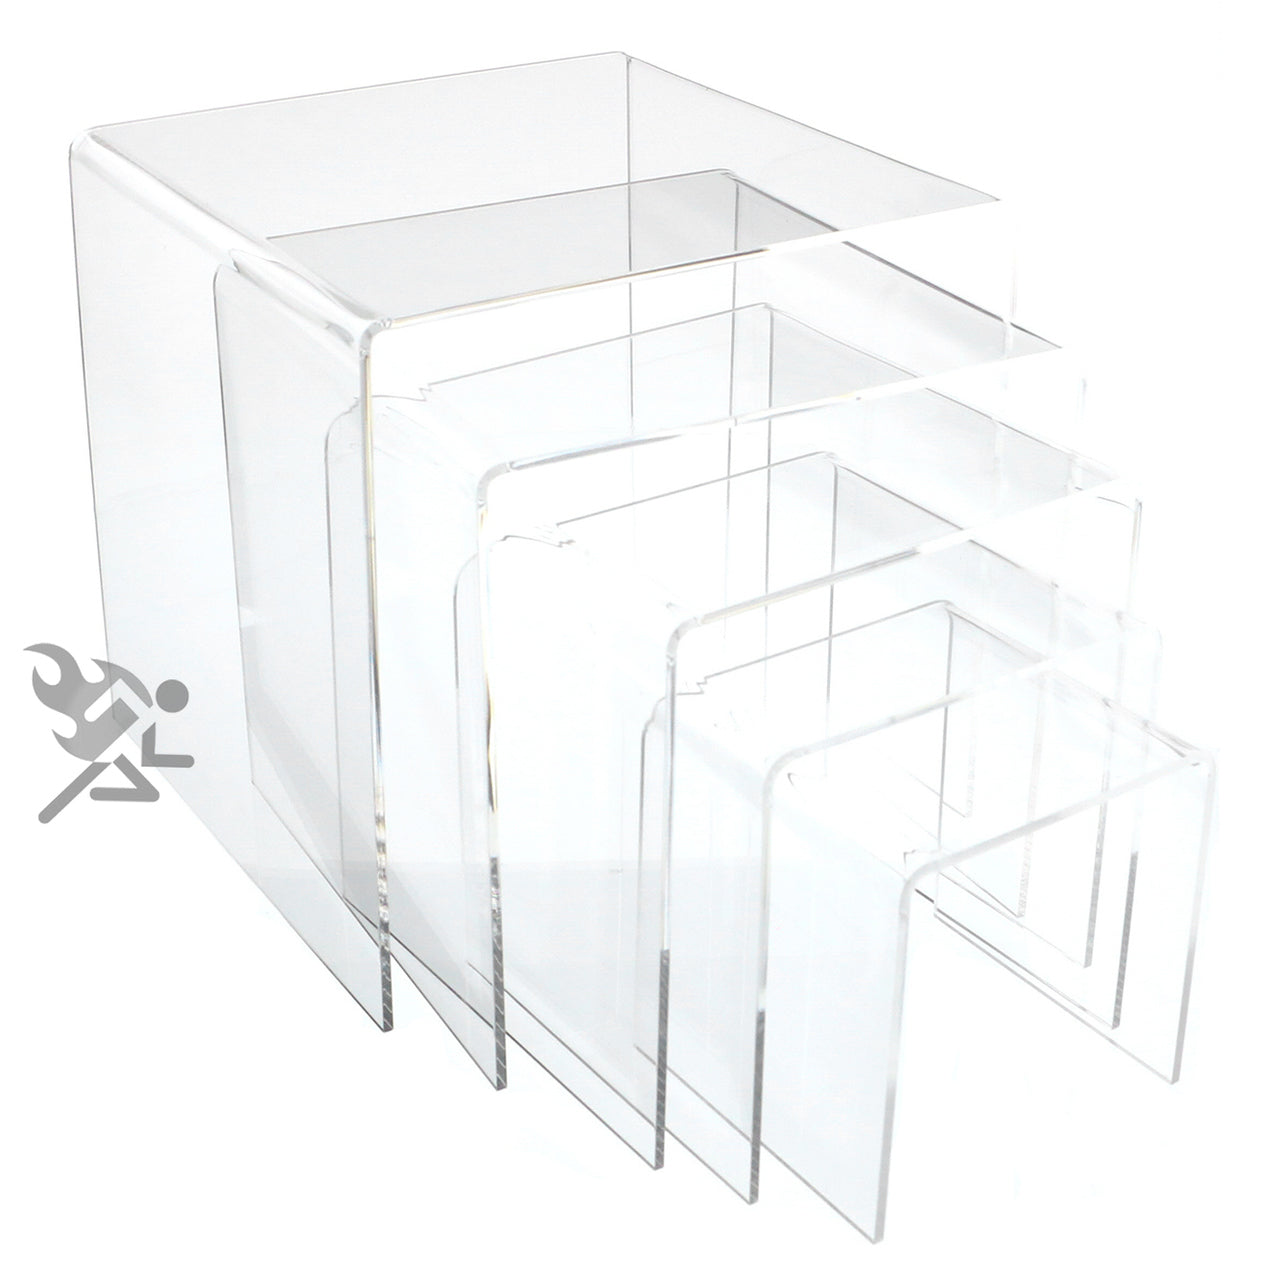 Clear Acrylic 1/8" Large Square Riser 5 Piece Set Display Stands